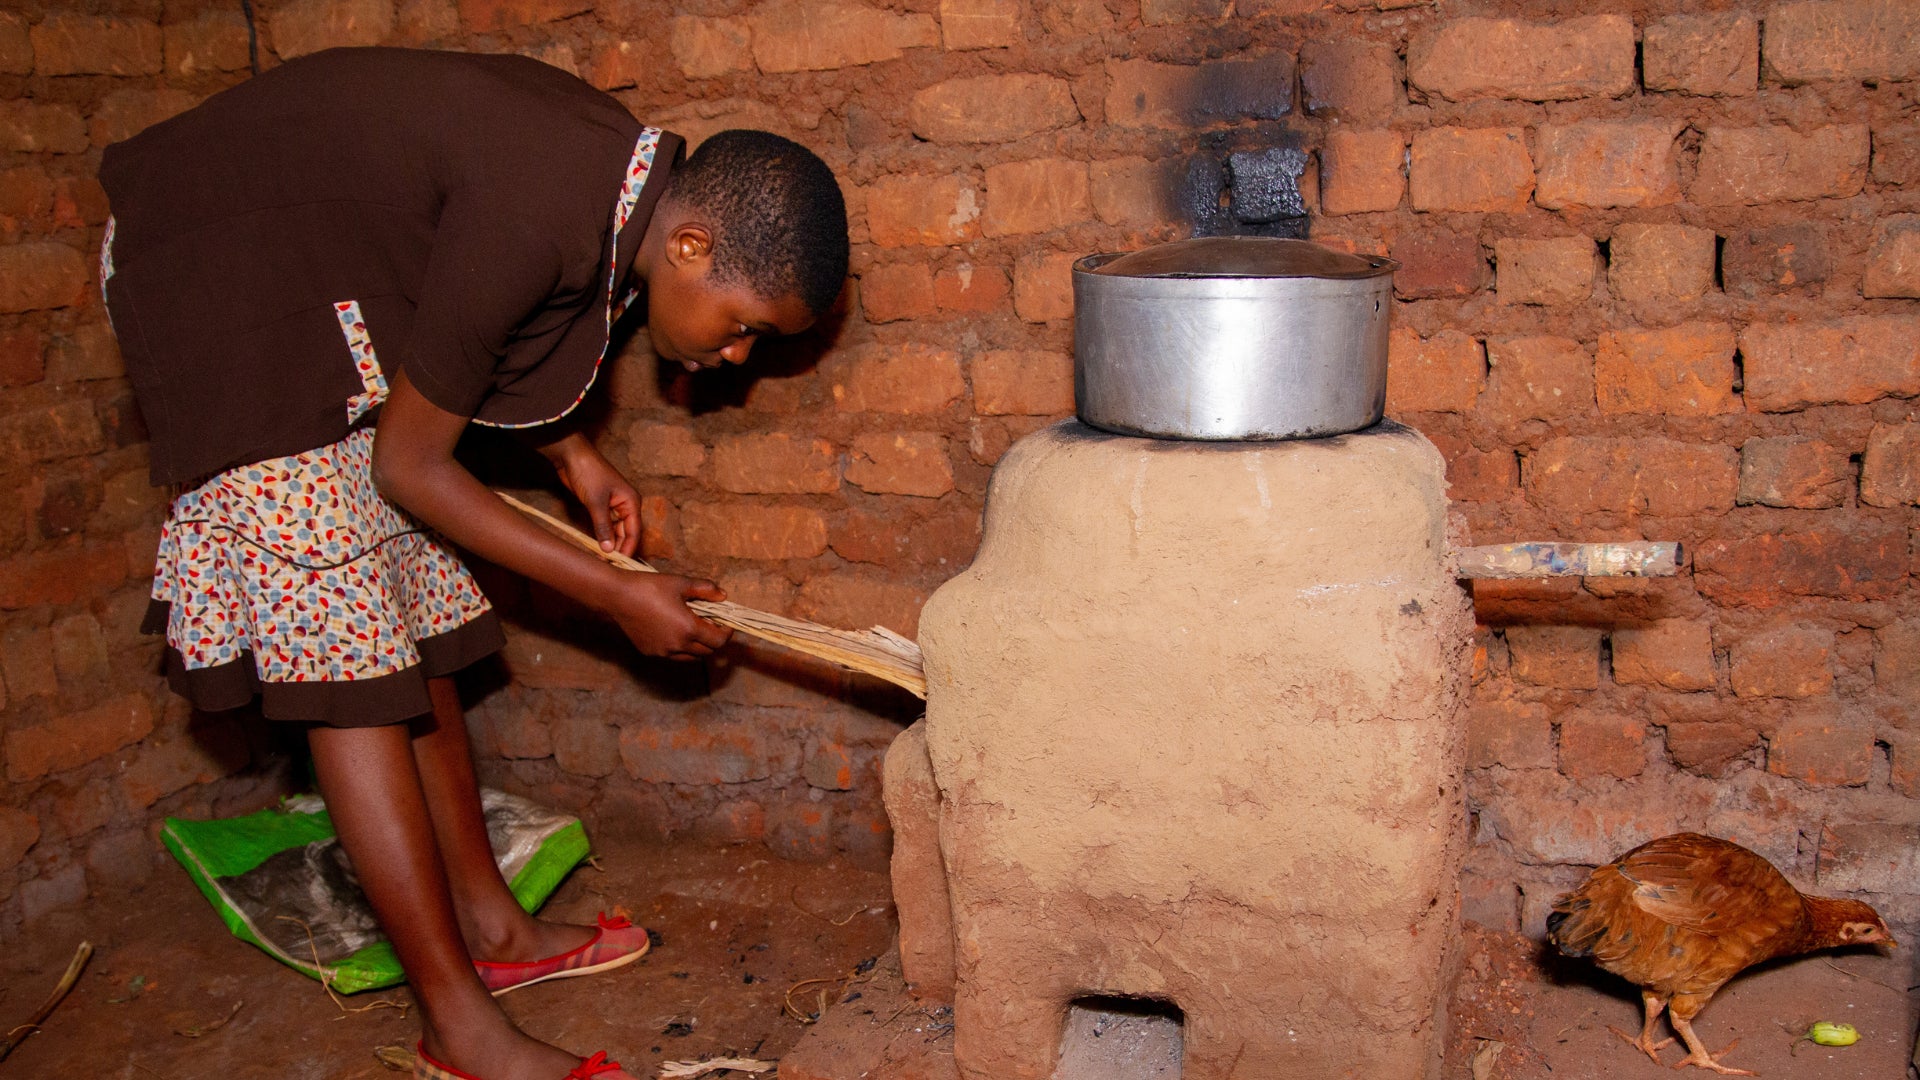  
Student from the 2021 Creatable program uses her newly built rocket stove in her home.